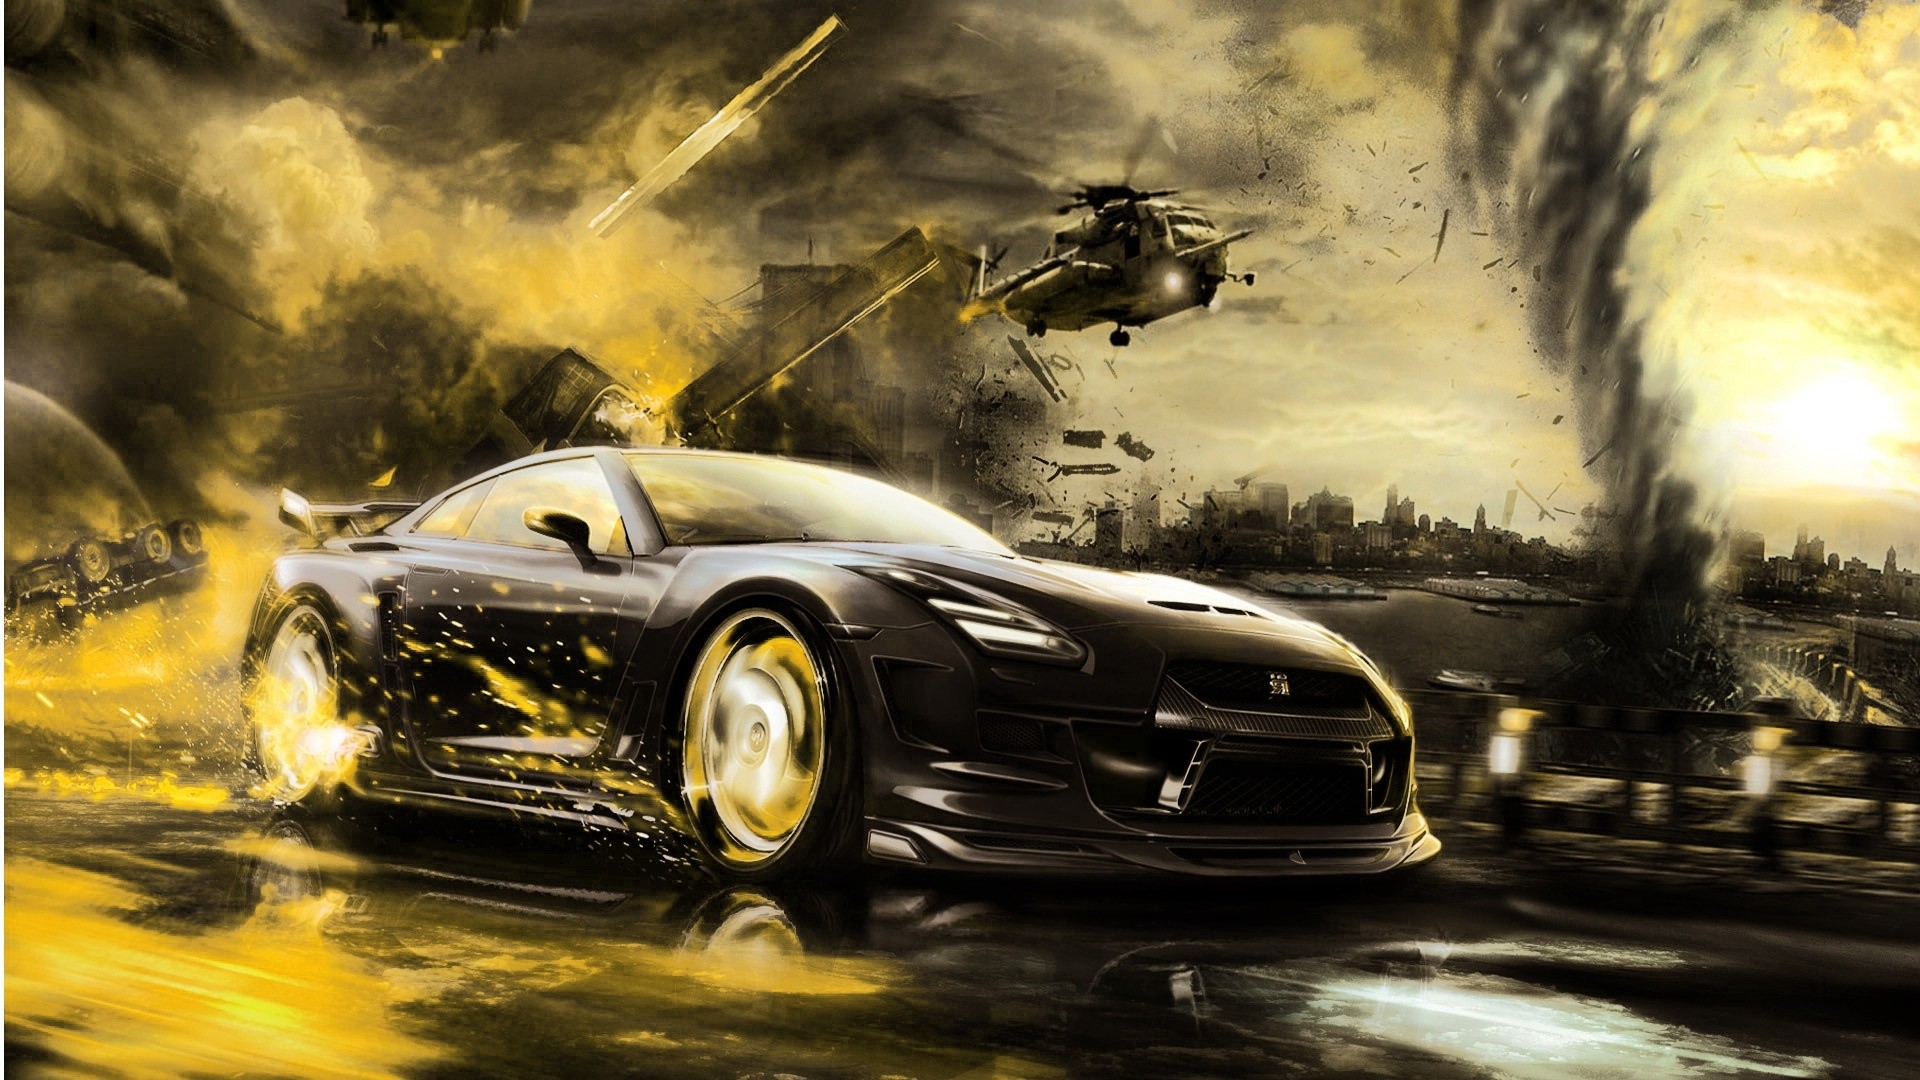 1920x1080 Images Cool Car Background Wallpapers.